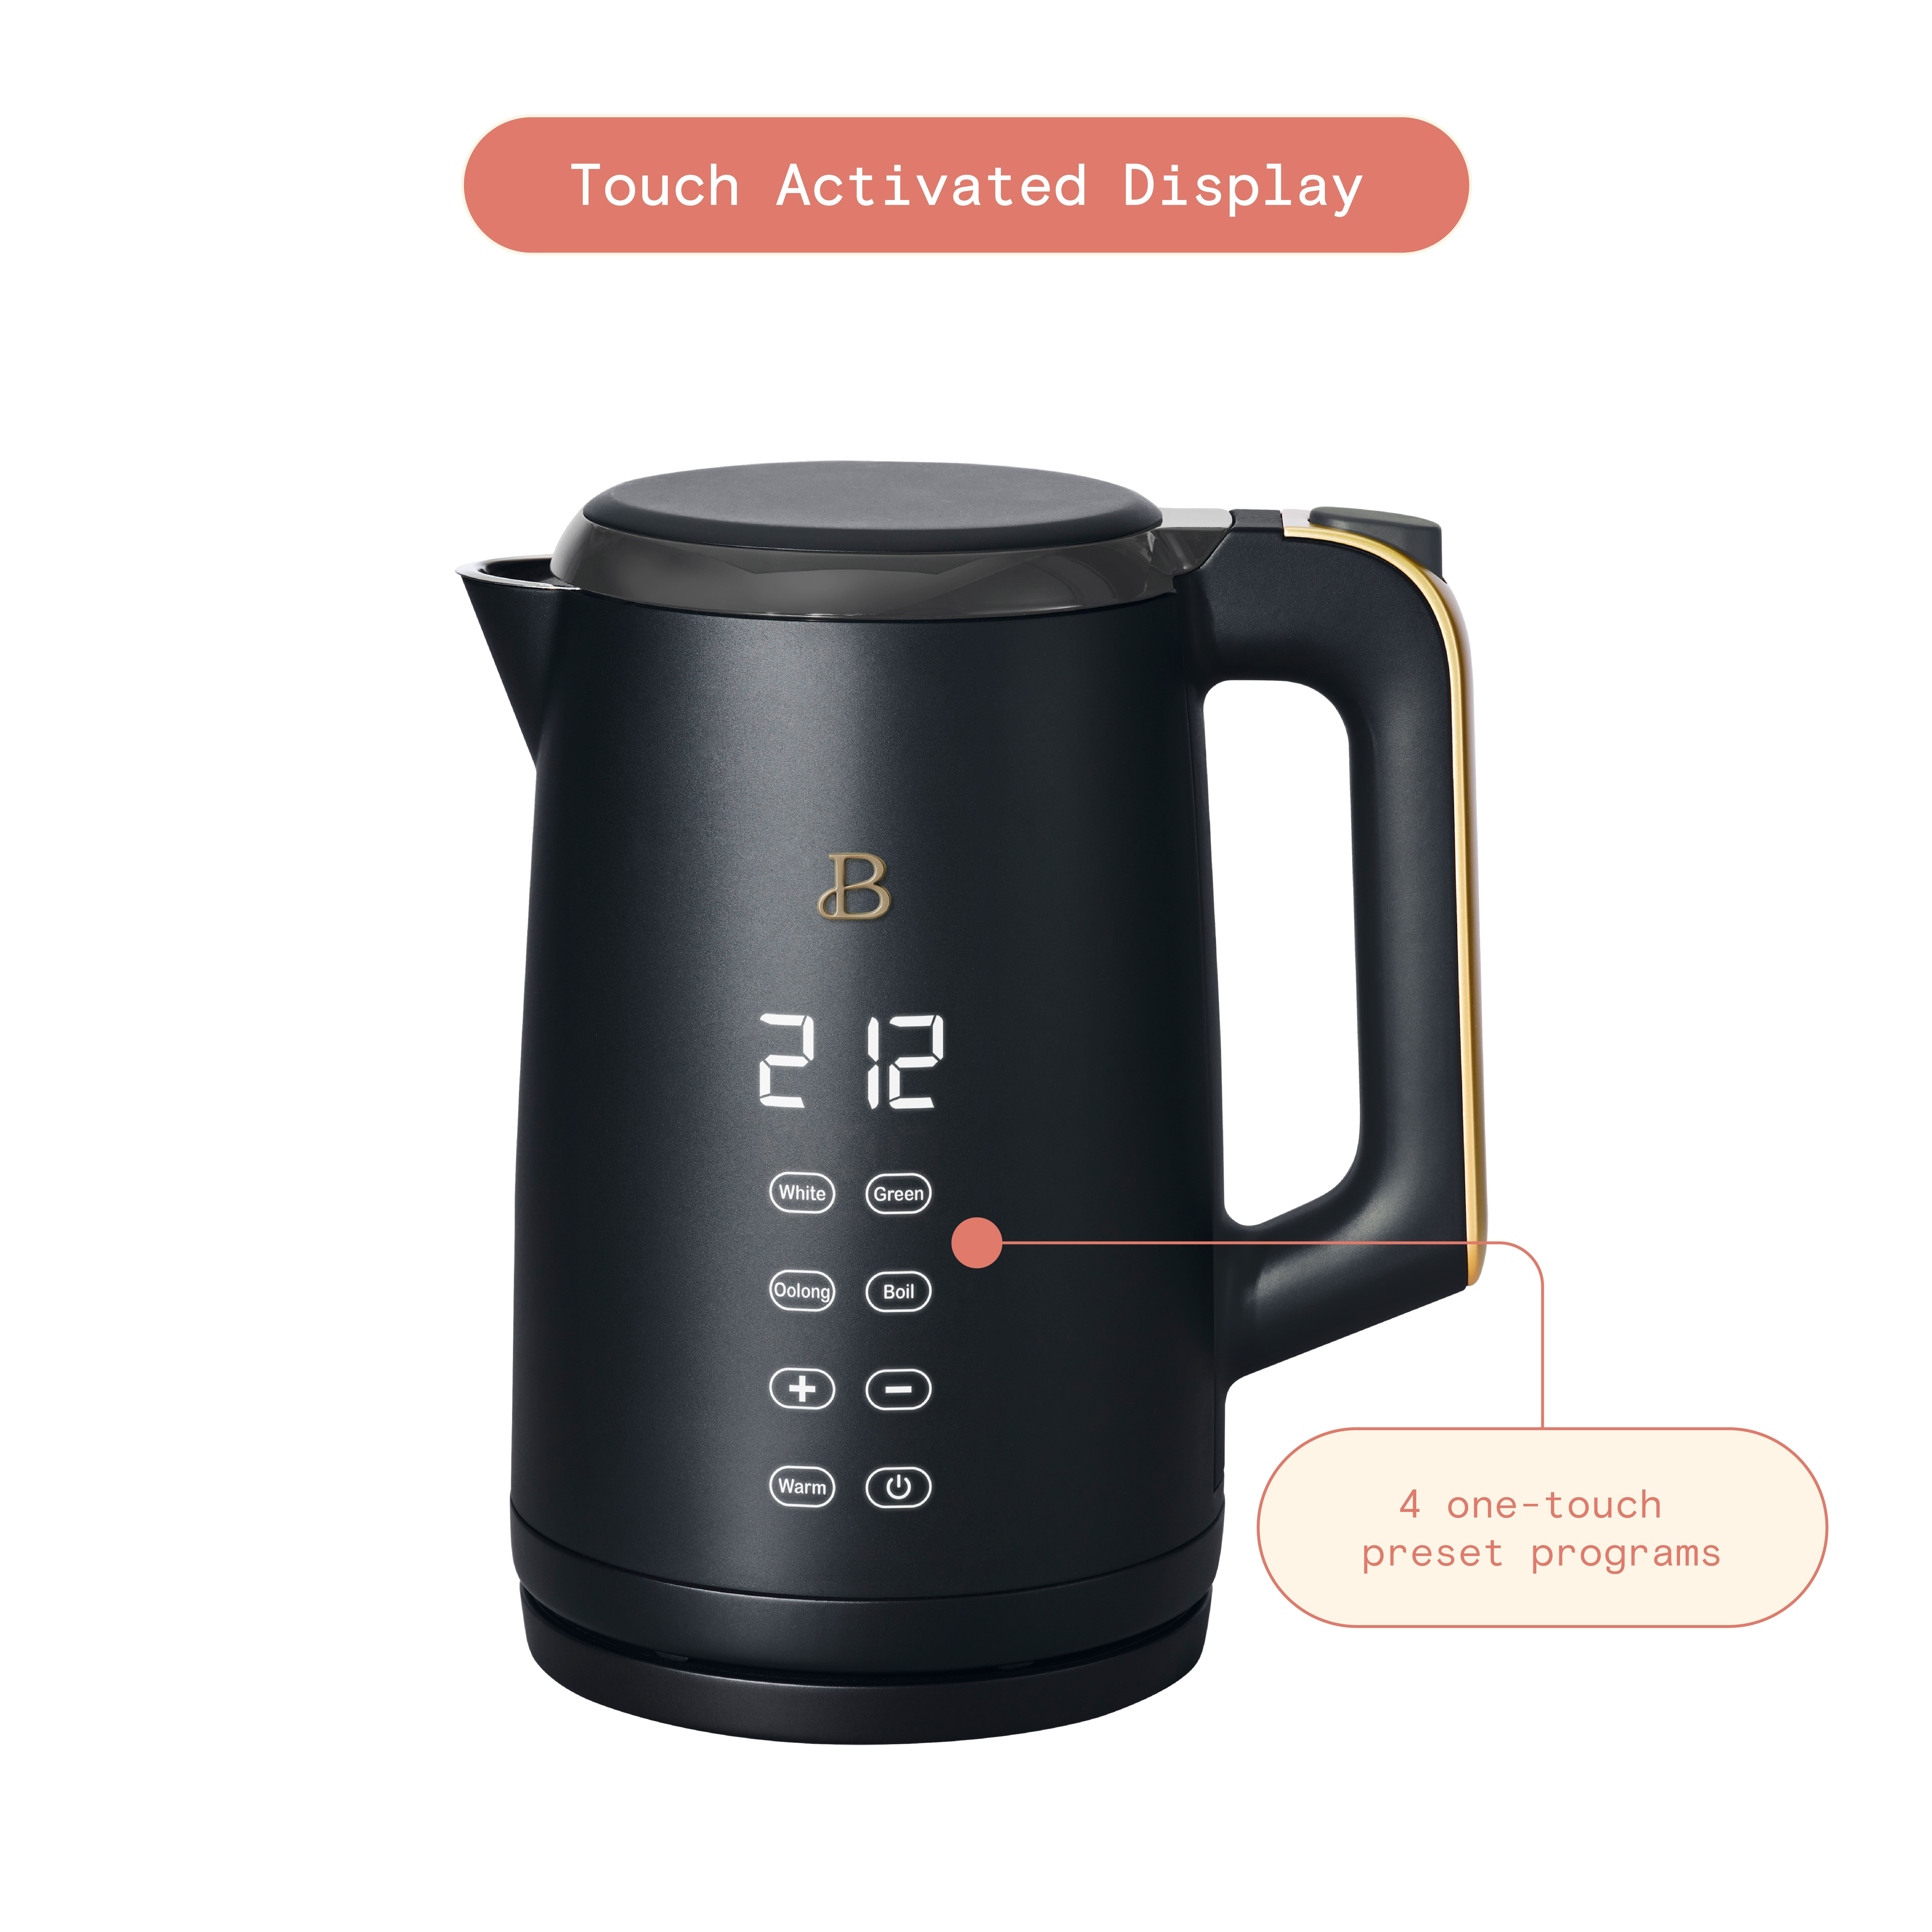 What are 5 Beneficial Reasons to use an Electric Kettle